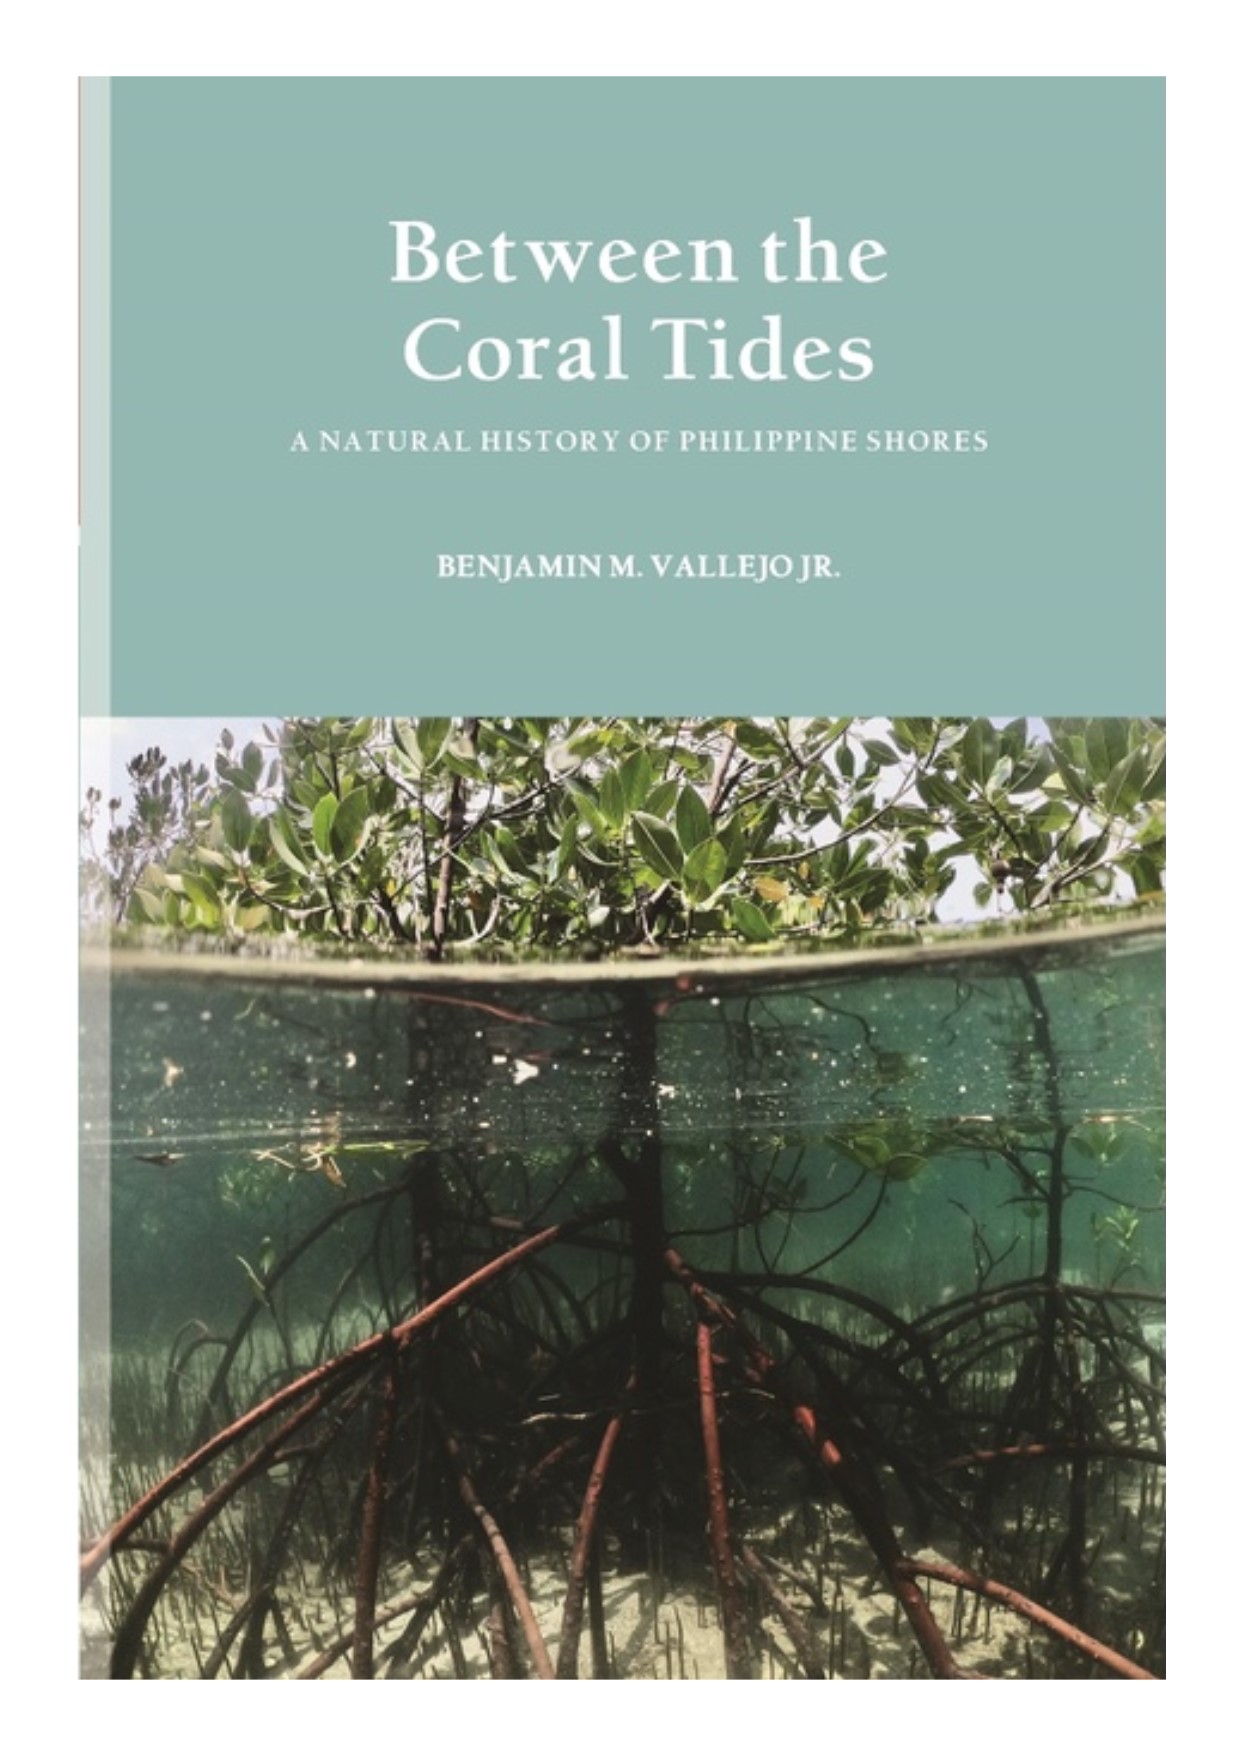 Between the coral tides a natural history of Philippine shores